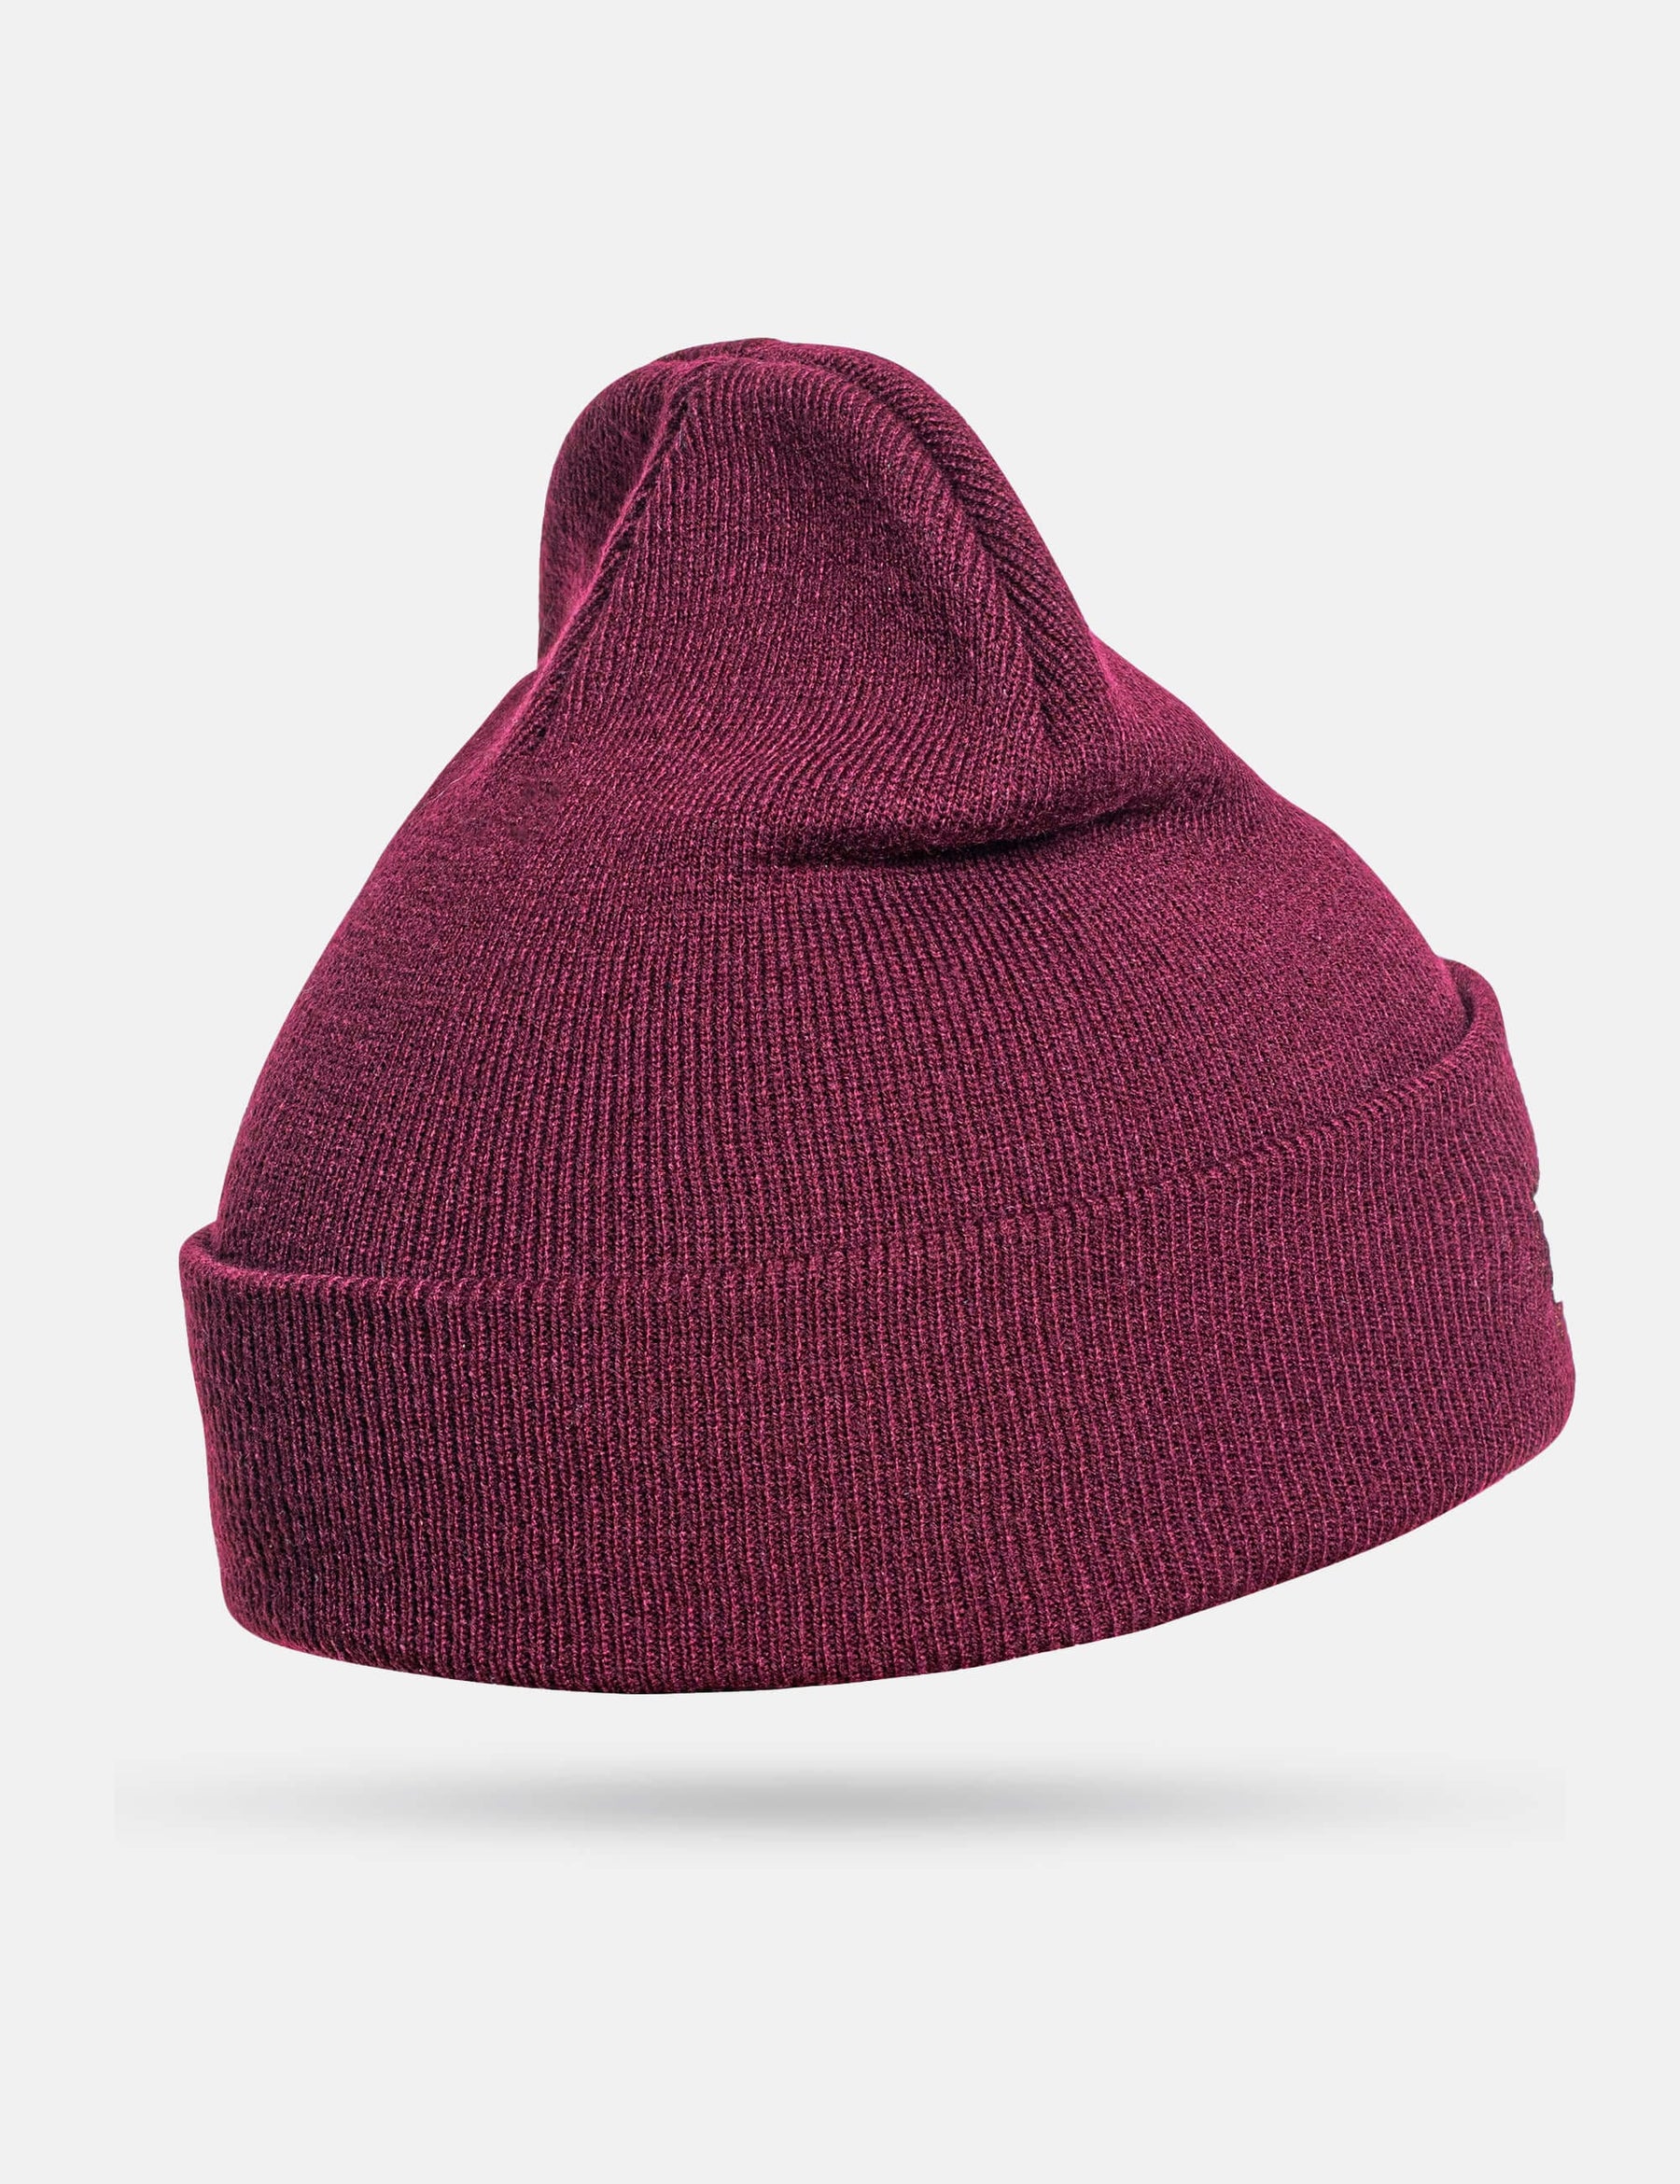 Side view of the GORNATION burgundy beanie.